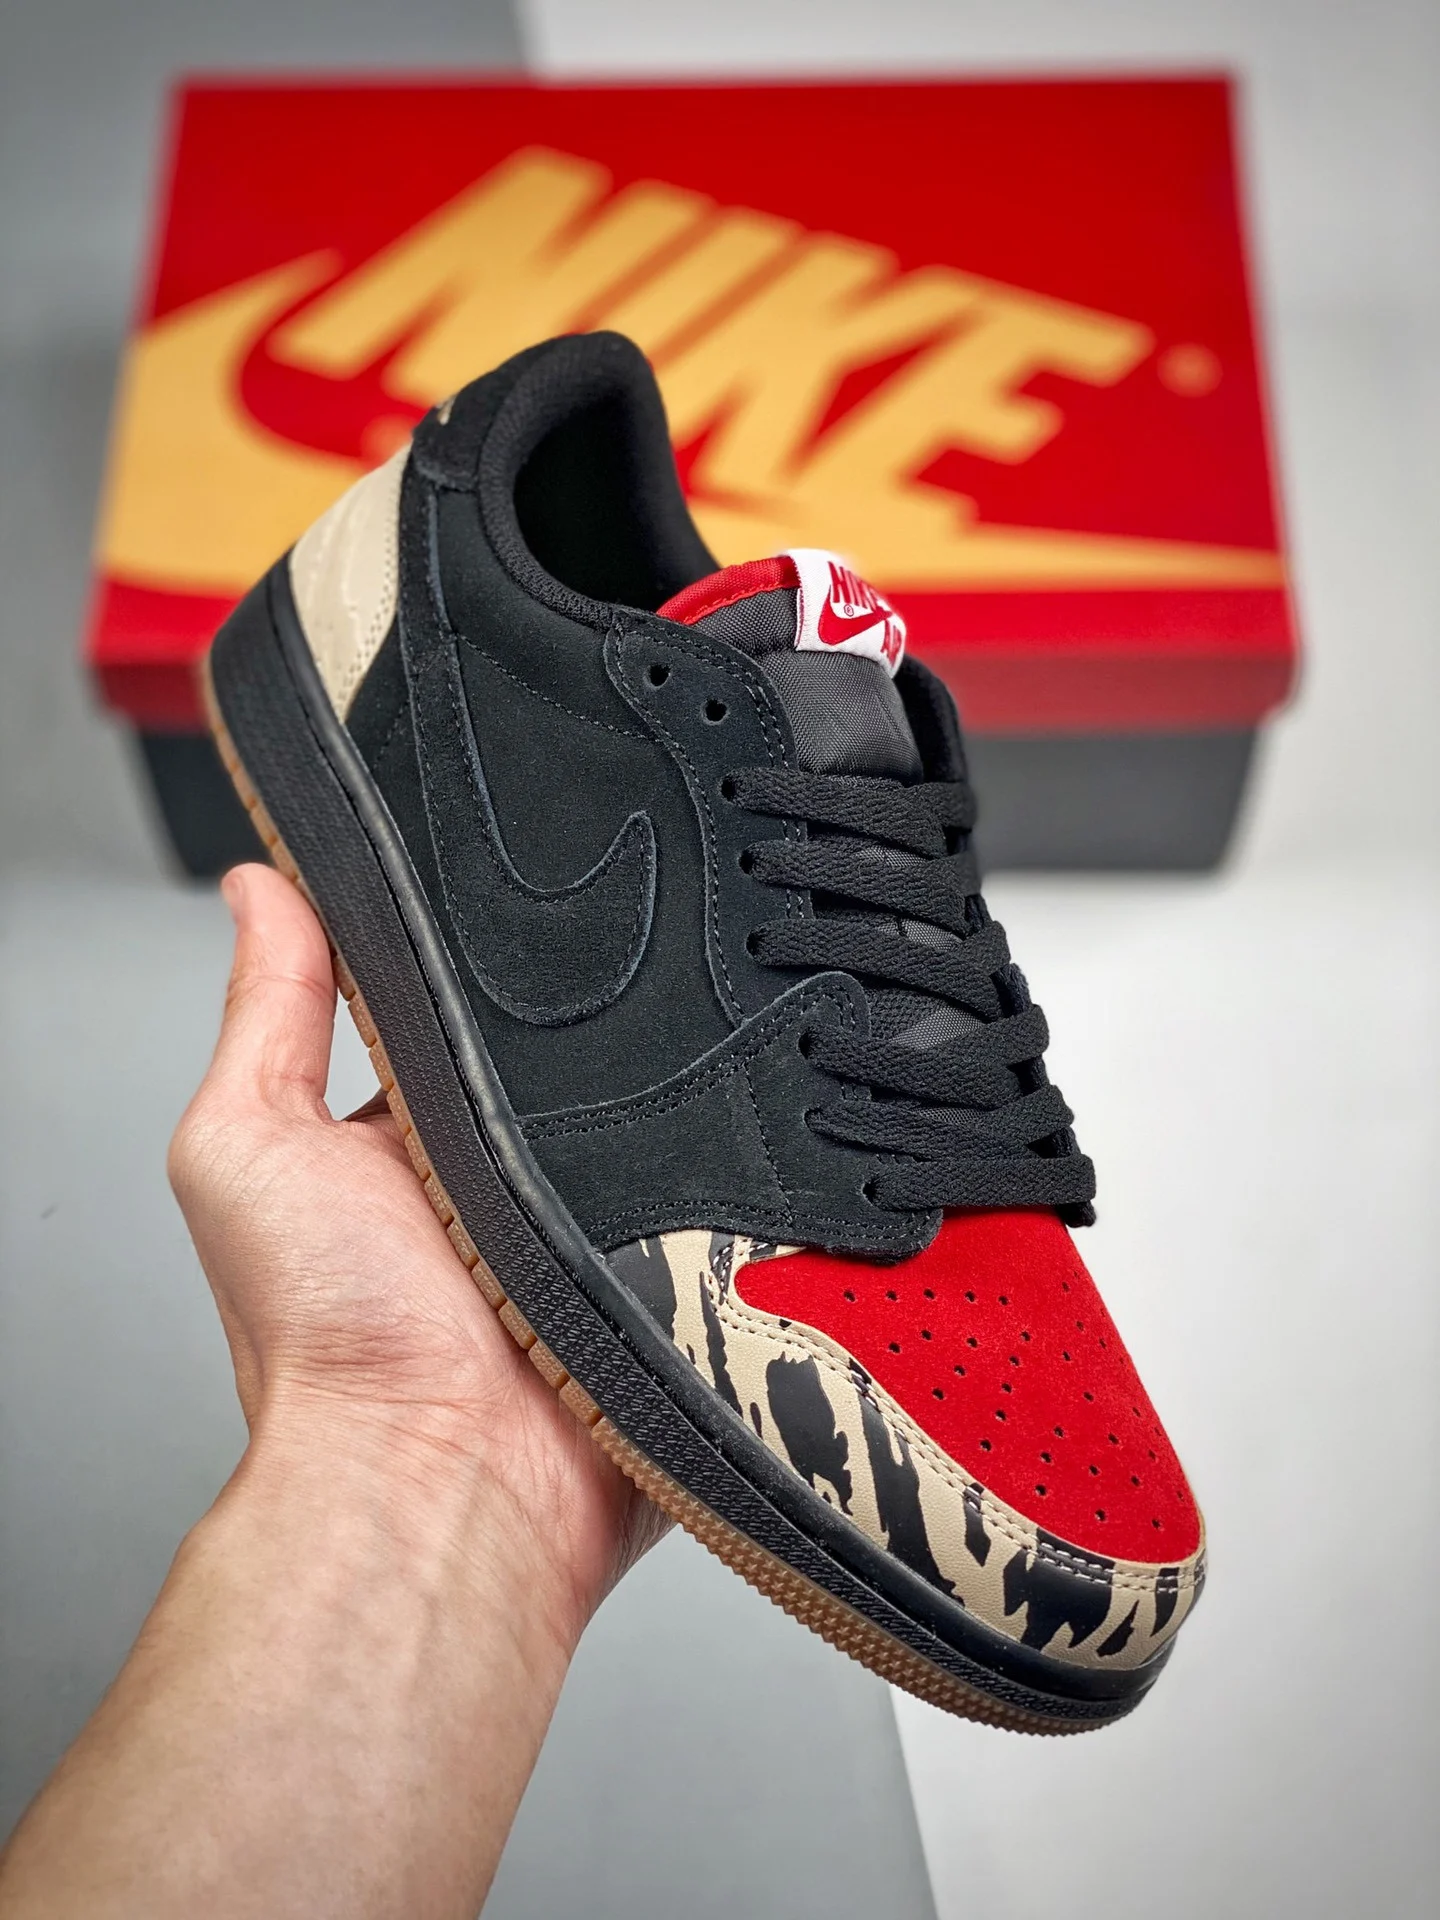 SoleFly x Air Jordan 1 Low Carnivore DN3400-001 For Sale